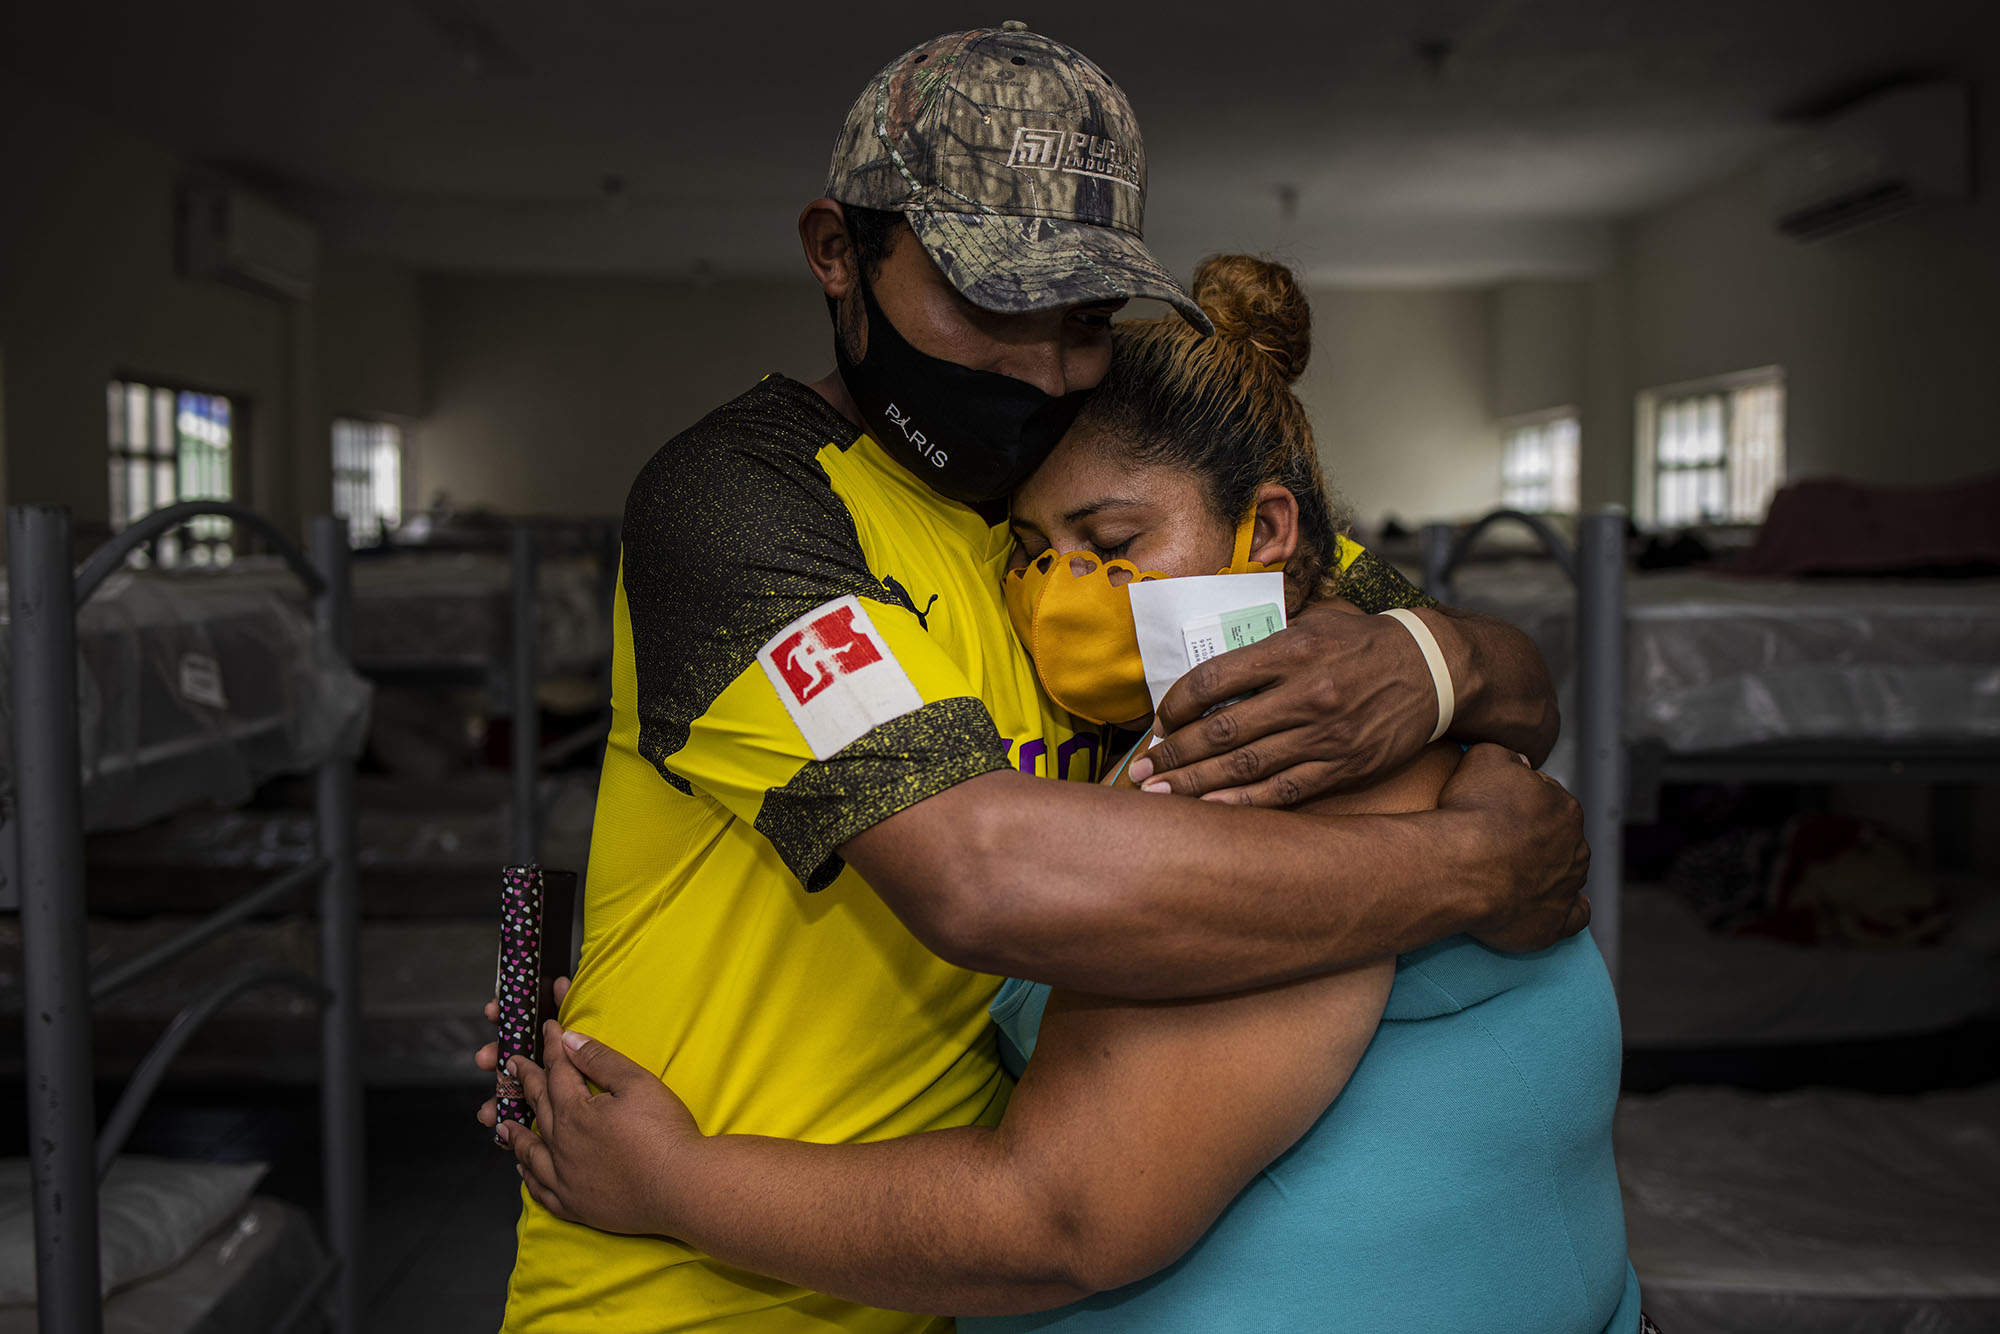 Cindy Caceres, 28, and Carlos Roberto Tunez, 27, from Honduras, are staying in Reynosa while seeking political asylum in the US. 